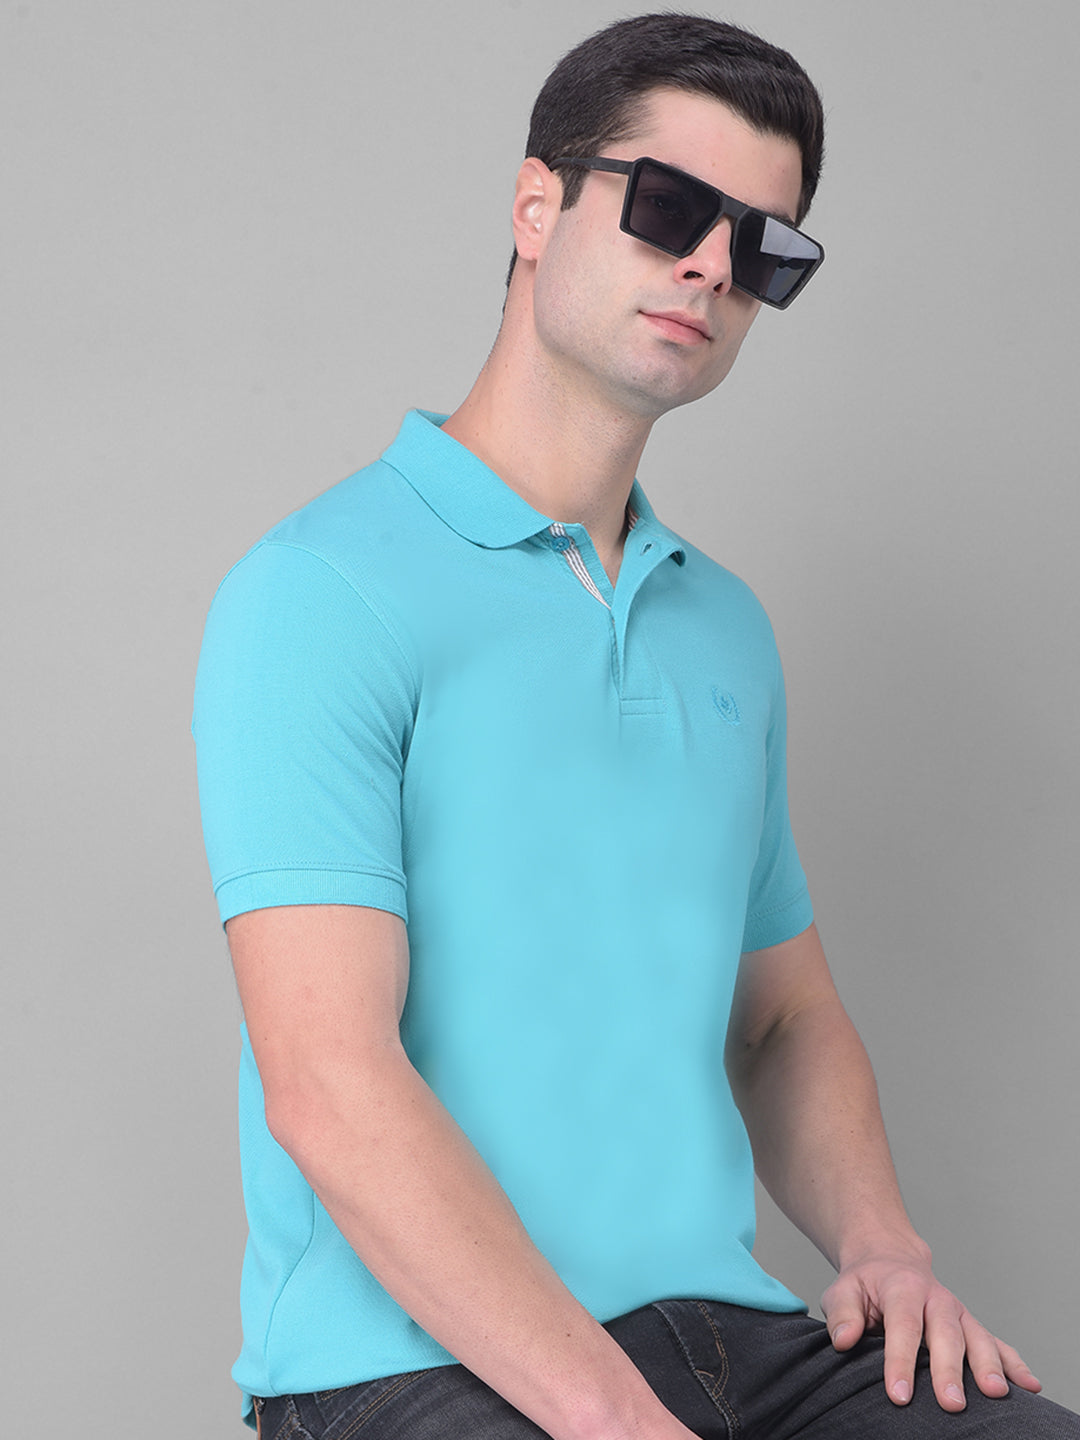 COBB SOLID BRIGHT TURQUOISE POLO NECK T-SHIRT